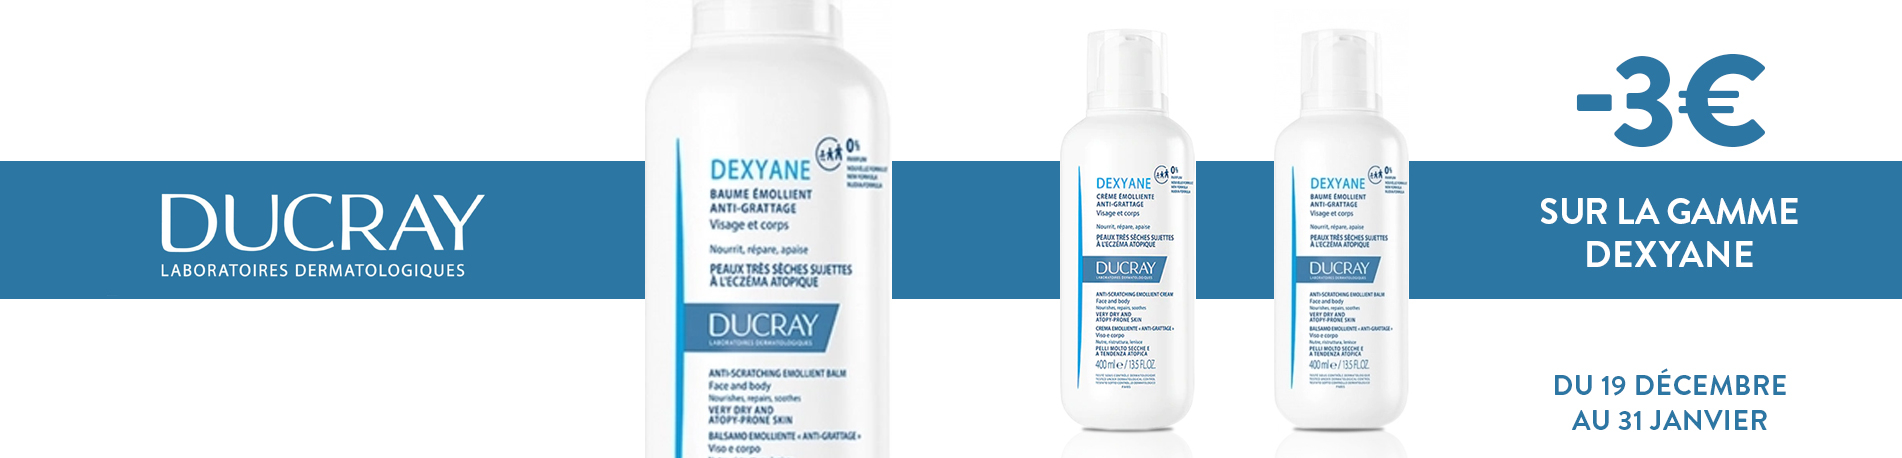 Promotion Ducray Dexyane